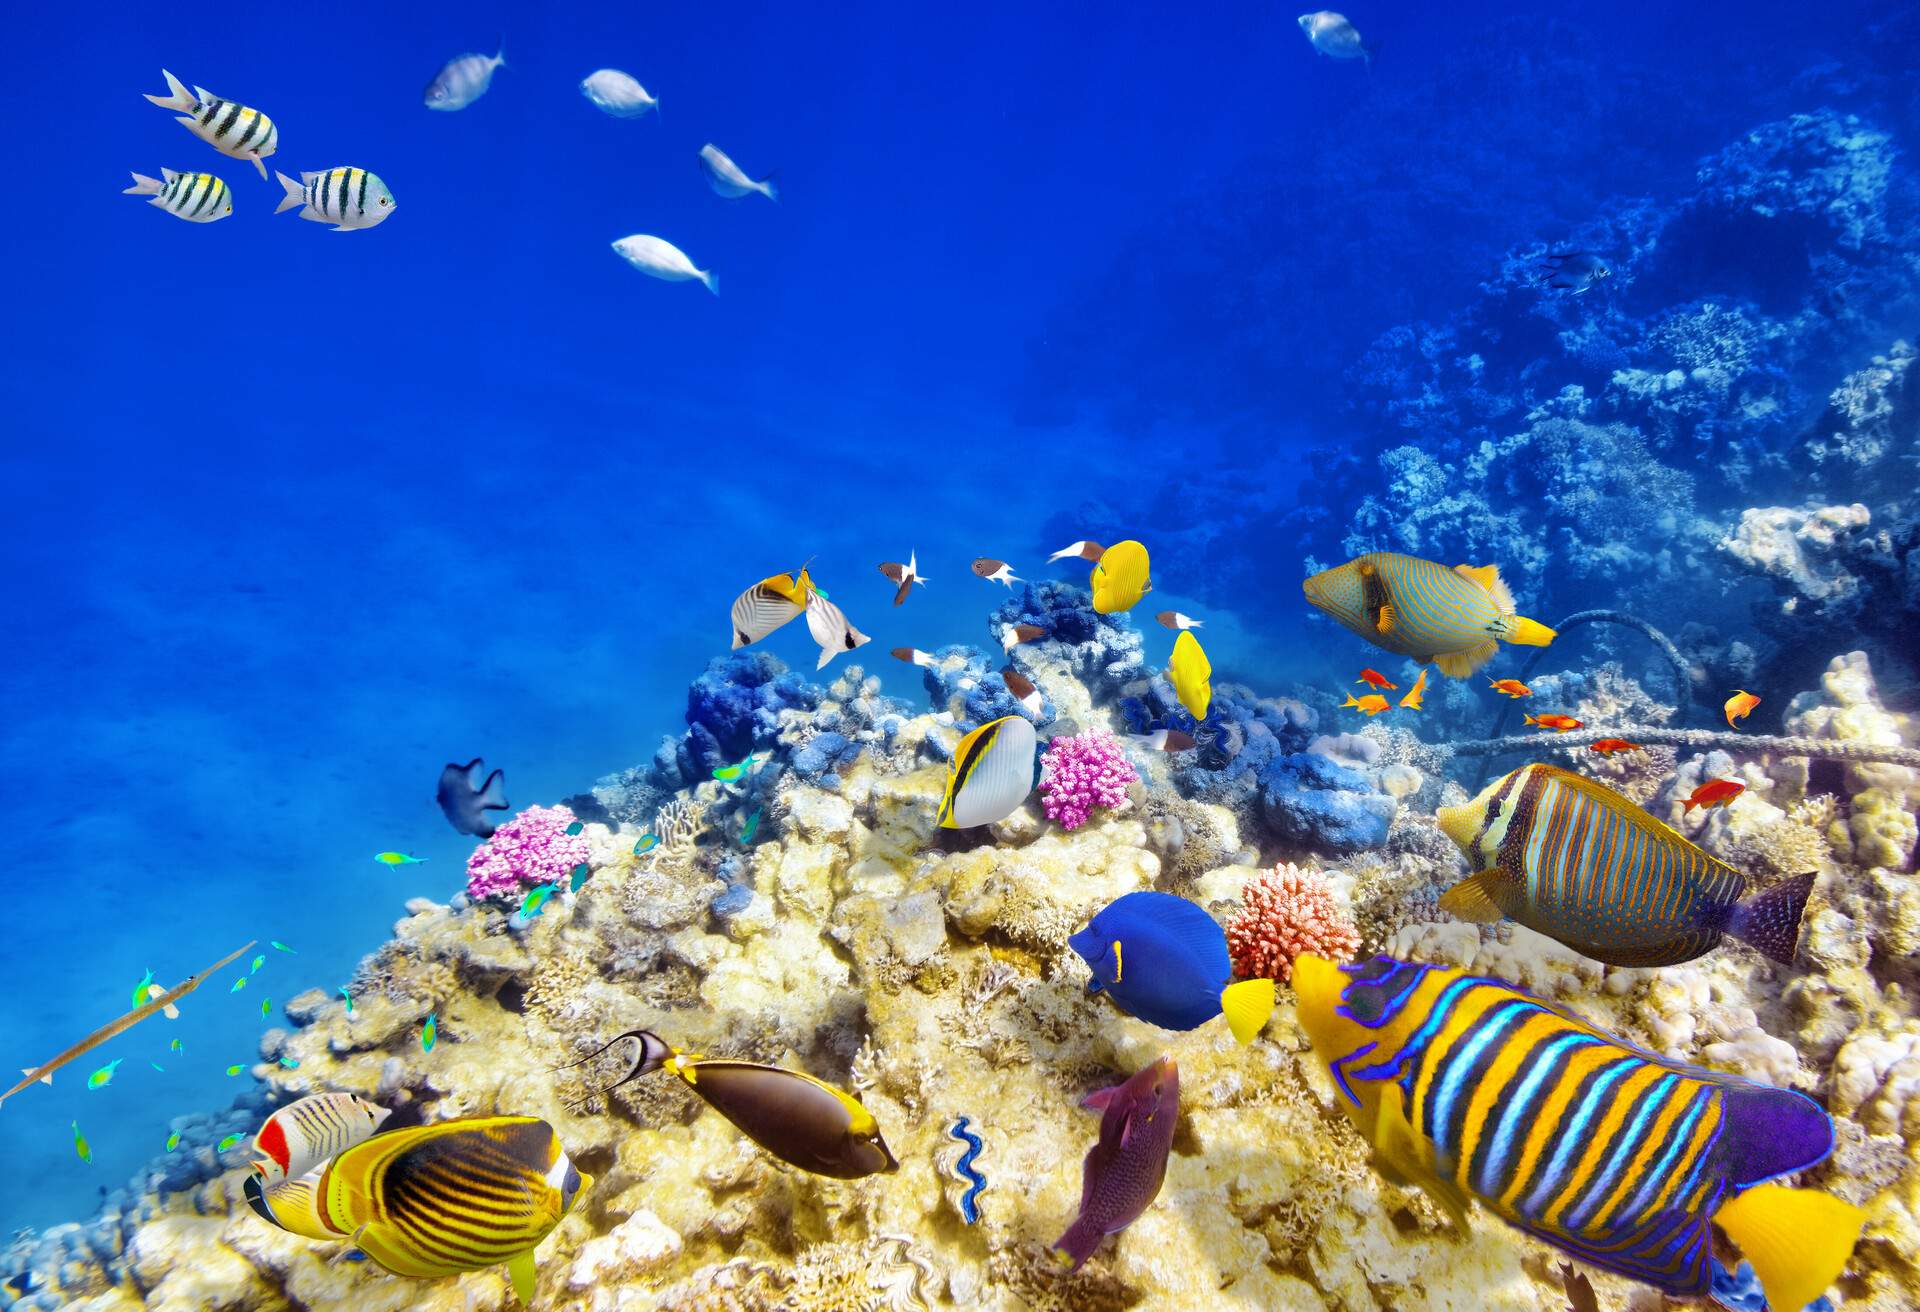 Wonderful and beautiful underwater world with corals and tropical fish.; Shutterstock ID 267592151